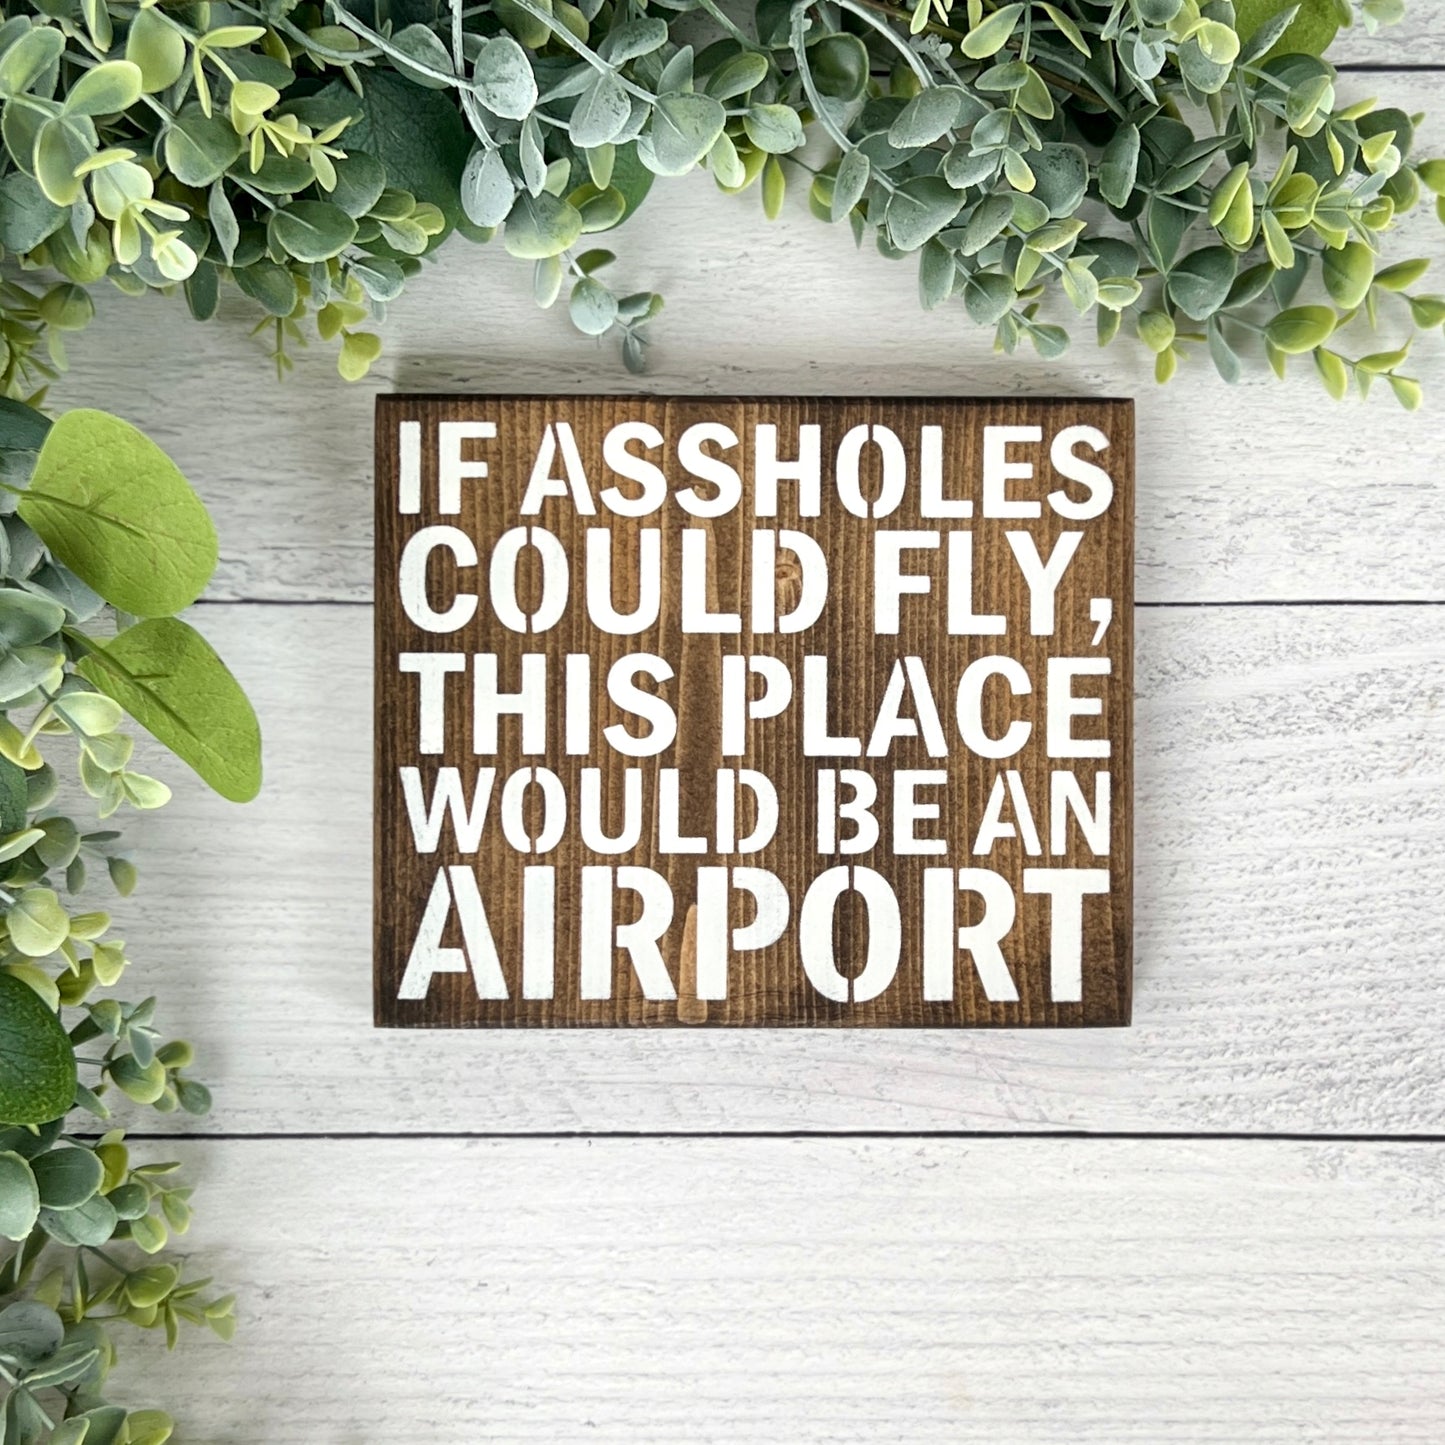 If Assholes could fly this place would be an airport